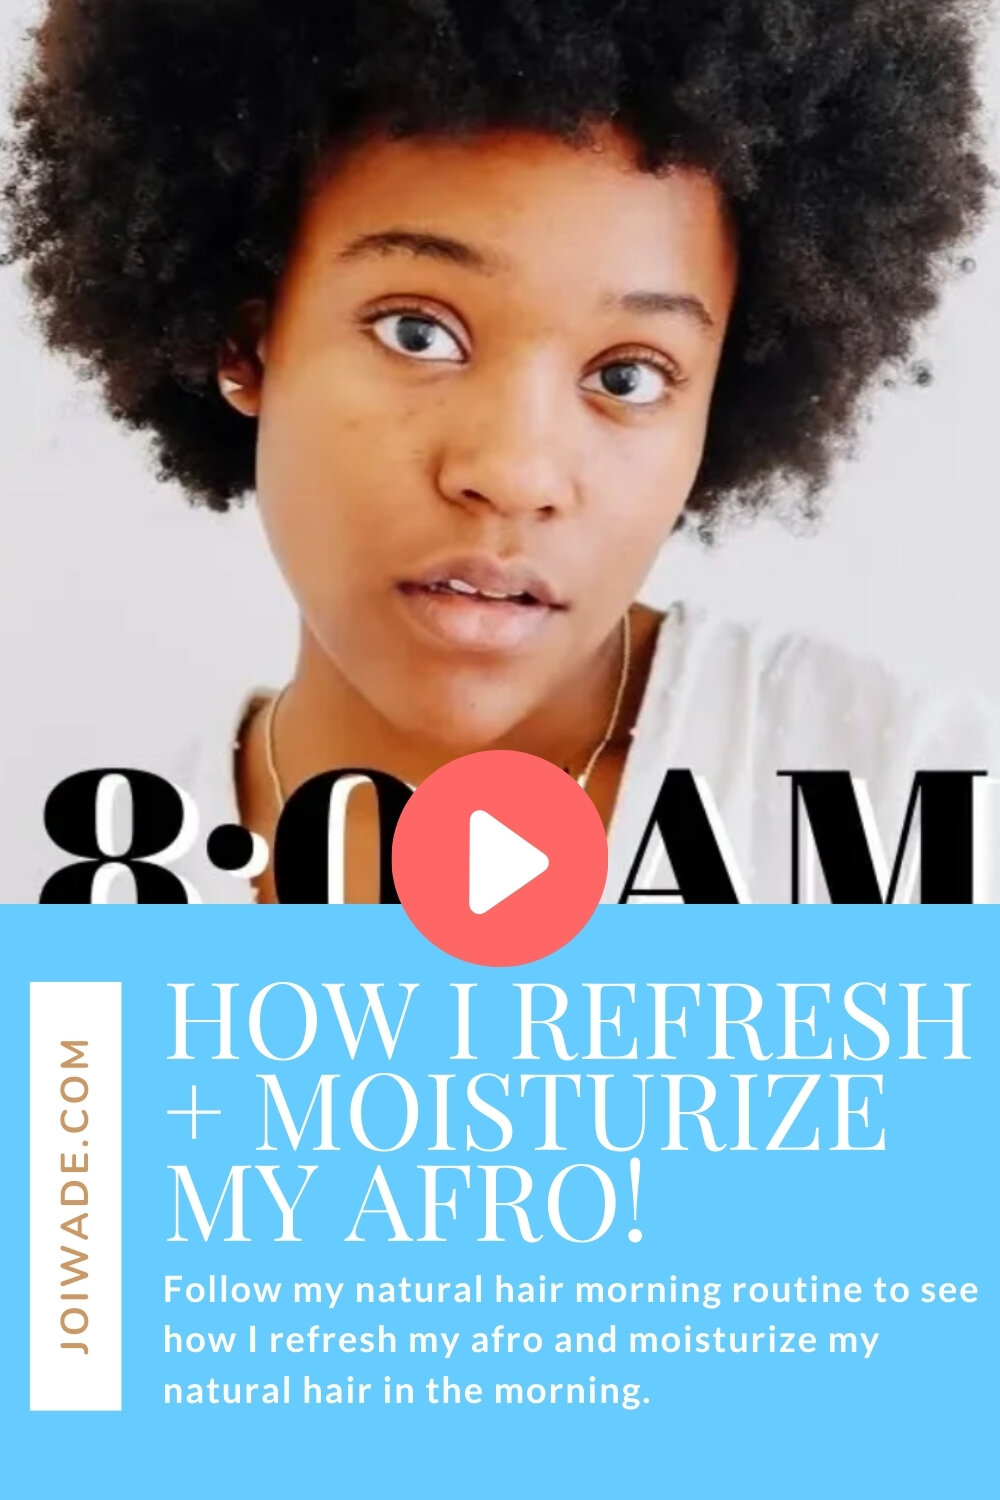 QUICK NATURAL HAIR MORNING ROUTINE: How I Refresh + Moisturize My Afro! —  Joi Wade